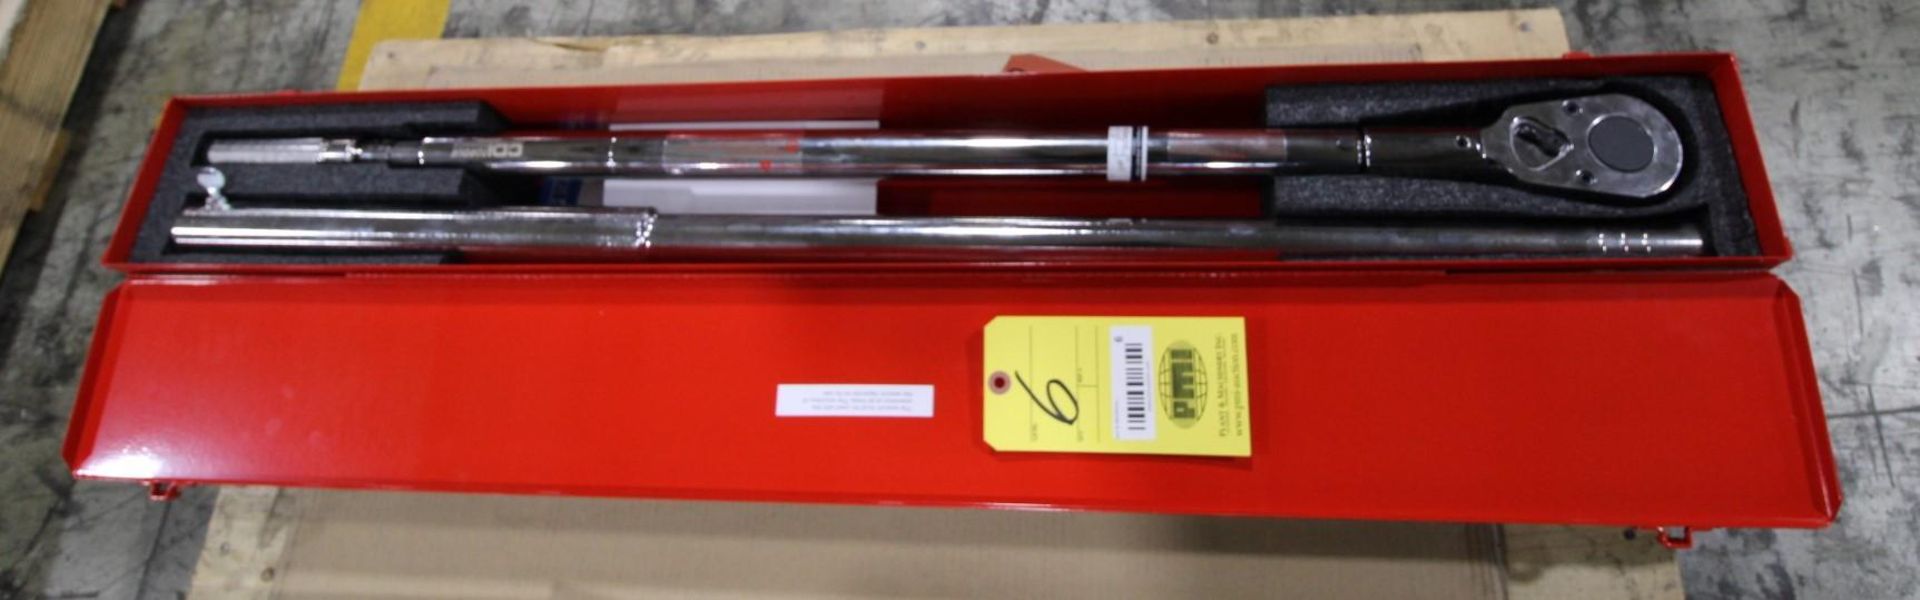 TORQUE WRENCH, CDI MDL. 1005MFRMH, dual scale micrometer adjustable click style torque wrench, w/